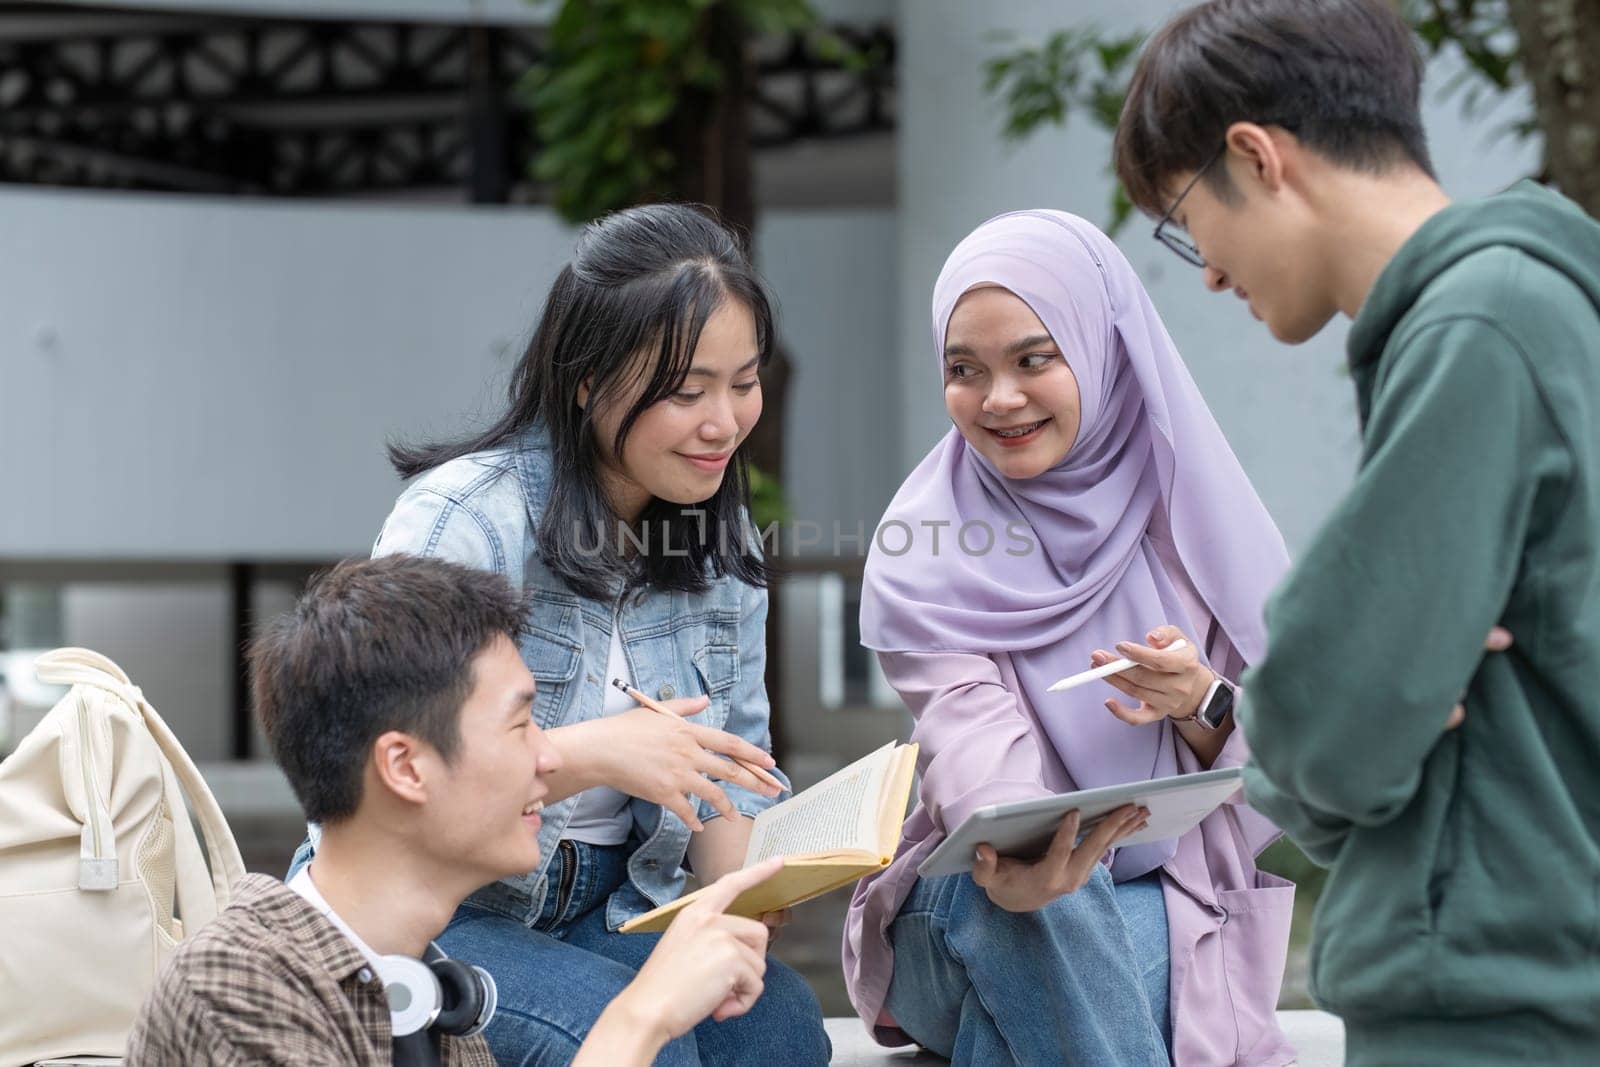 Student friendship concept with multiracial diverse classmate friend sitting together at campus college park. Millennial people having fun social gathering outside. Youth teenage and education.